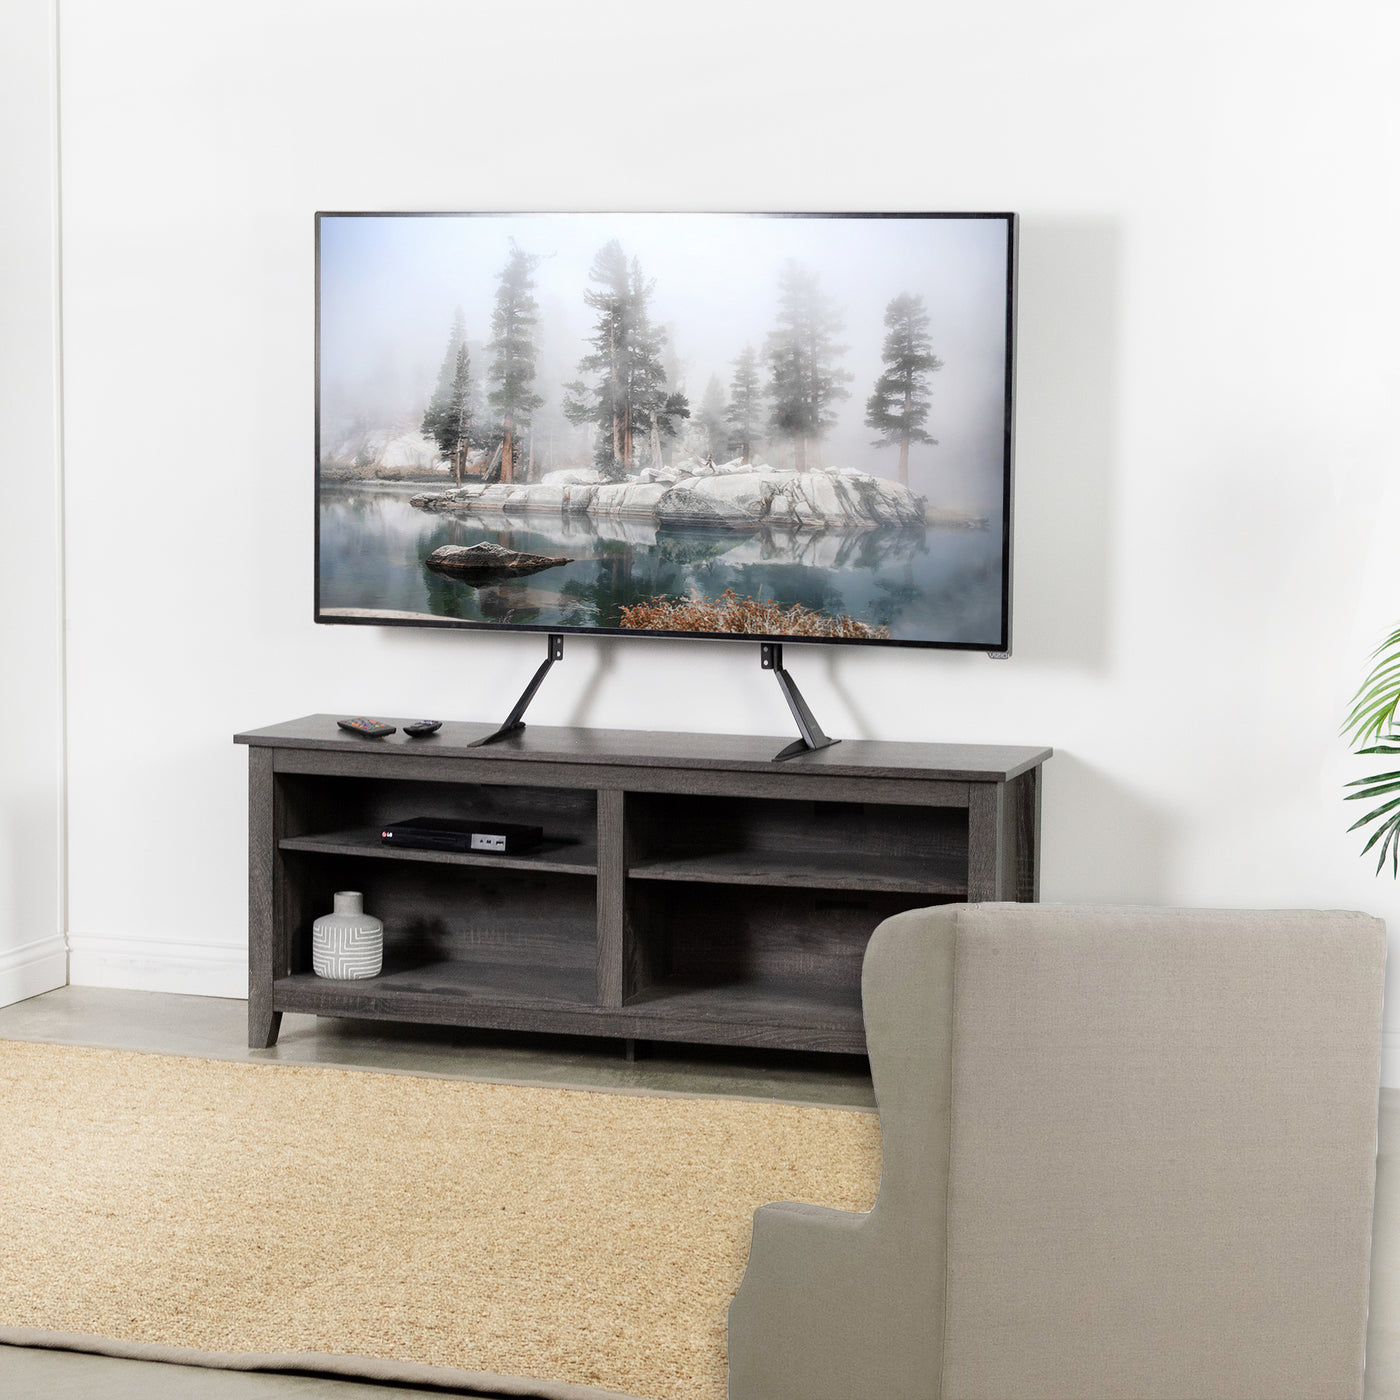  Tabletop TV stands in a modern living space.